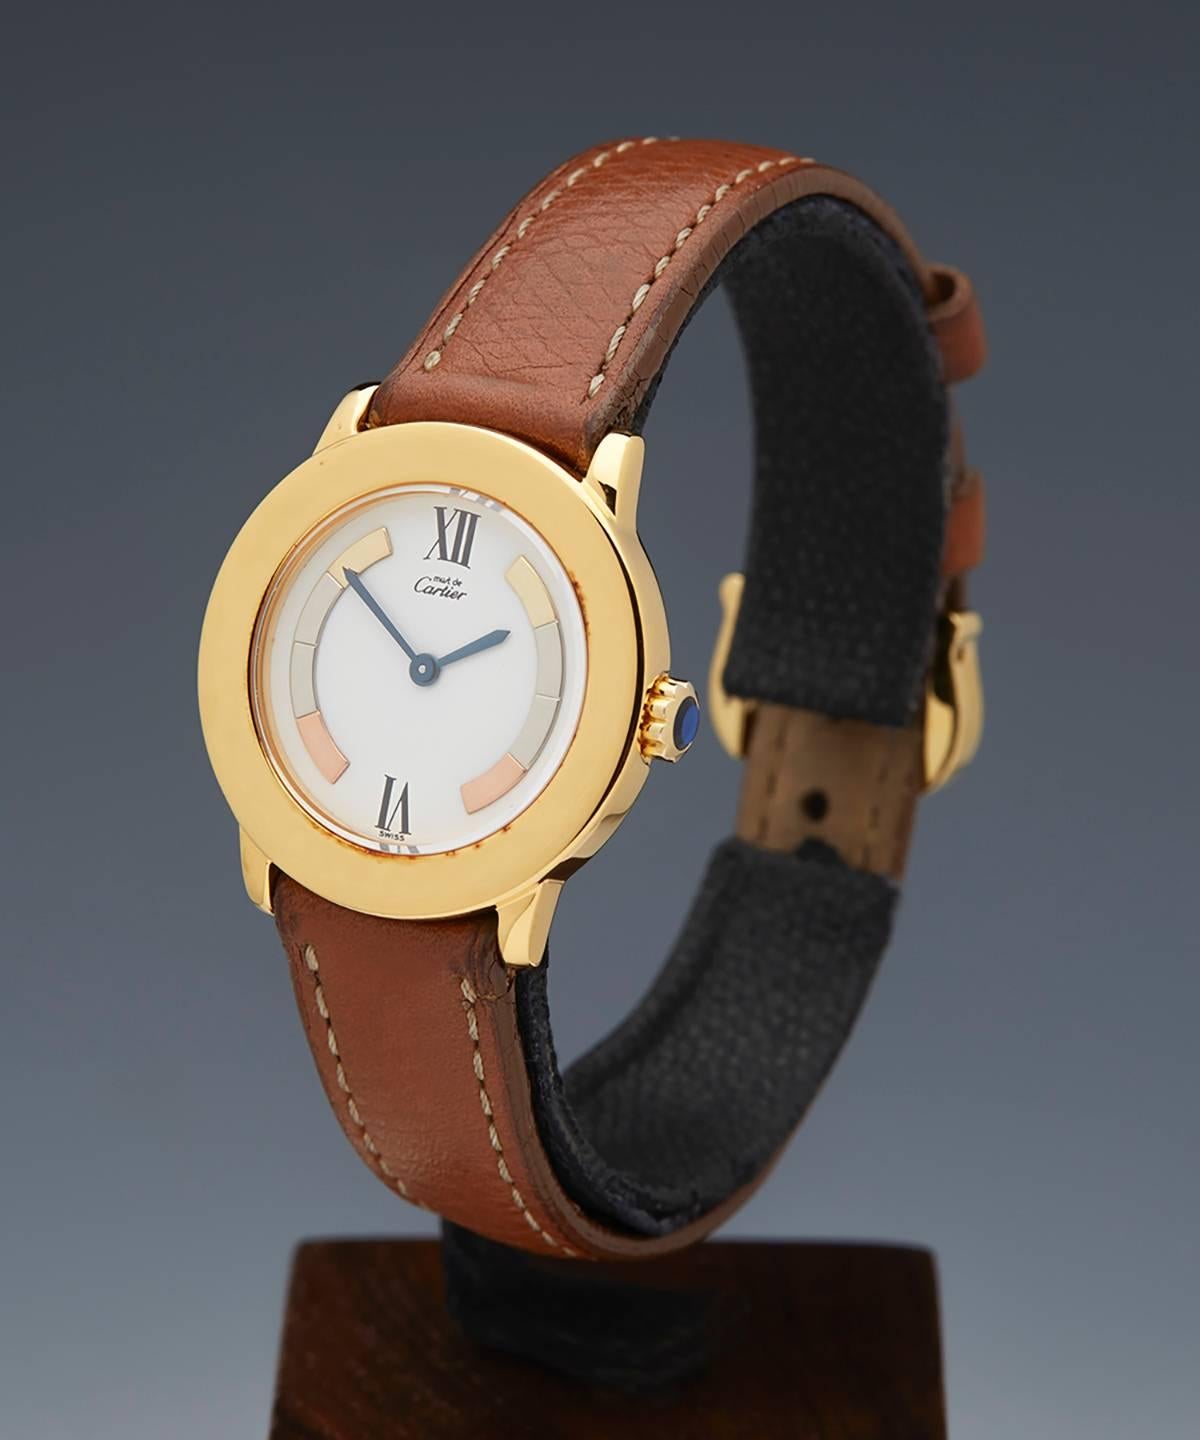 Specifications

Movement: Quartz
Case: 18k Yellow Gold Plated 925 Sterling Silver
Case Diameter: 22mm
Dial: White with Tri Colour
Bracelet: Brown Lizard Leather
Strap Length: Adjustable
Buckle: Tang
Glass: Sapphire Crystal
Water